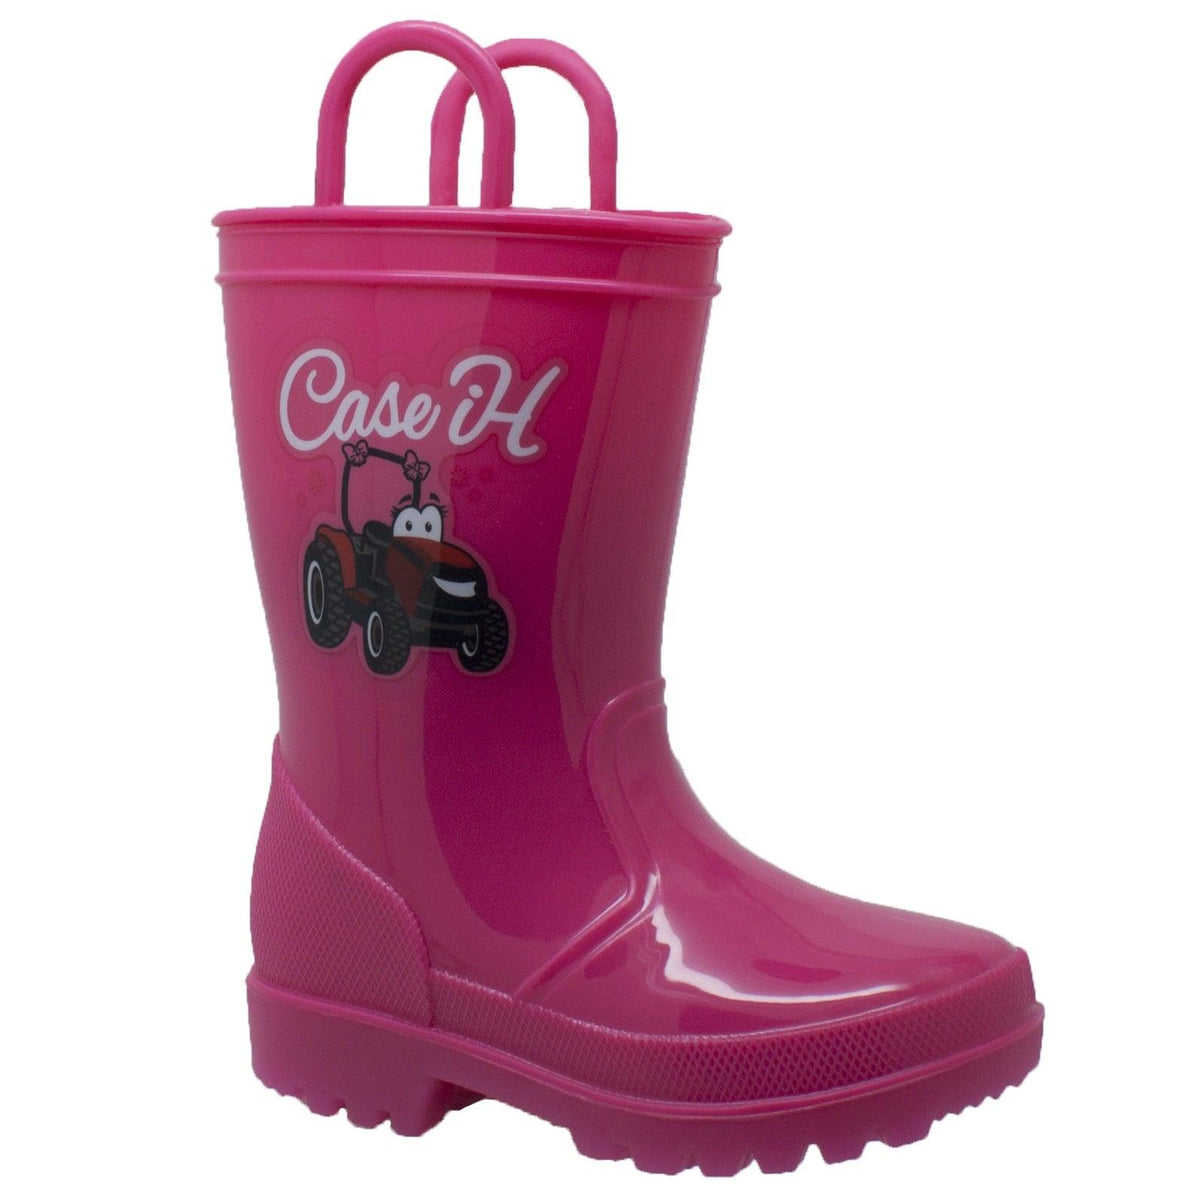 Case IH Children's PVC Boot with Light-Up Outsole Pink - Flyclothing LLC